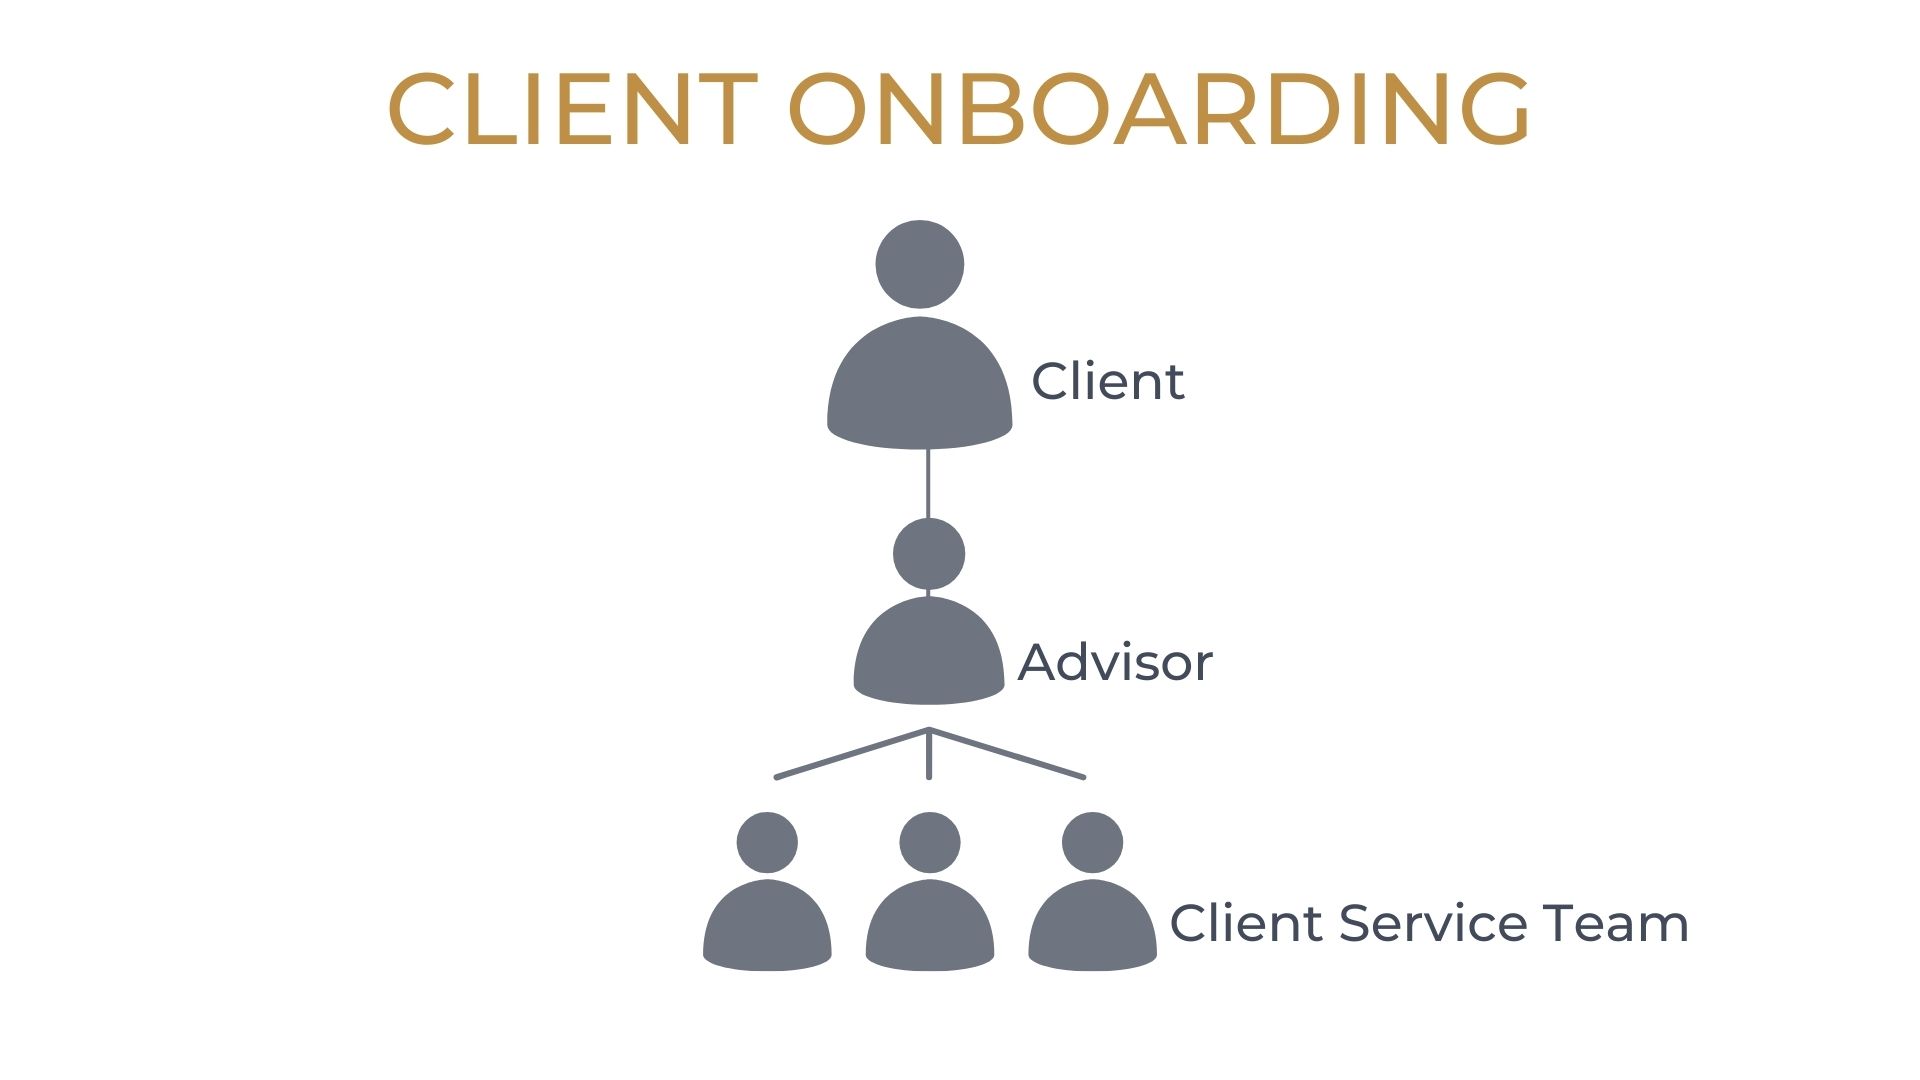 Client Onboarding: You Can Never  Make A Second First Impression